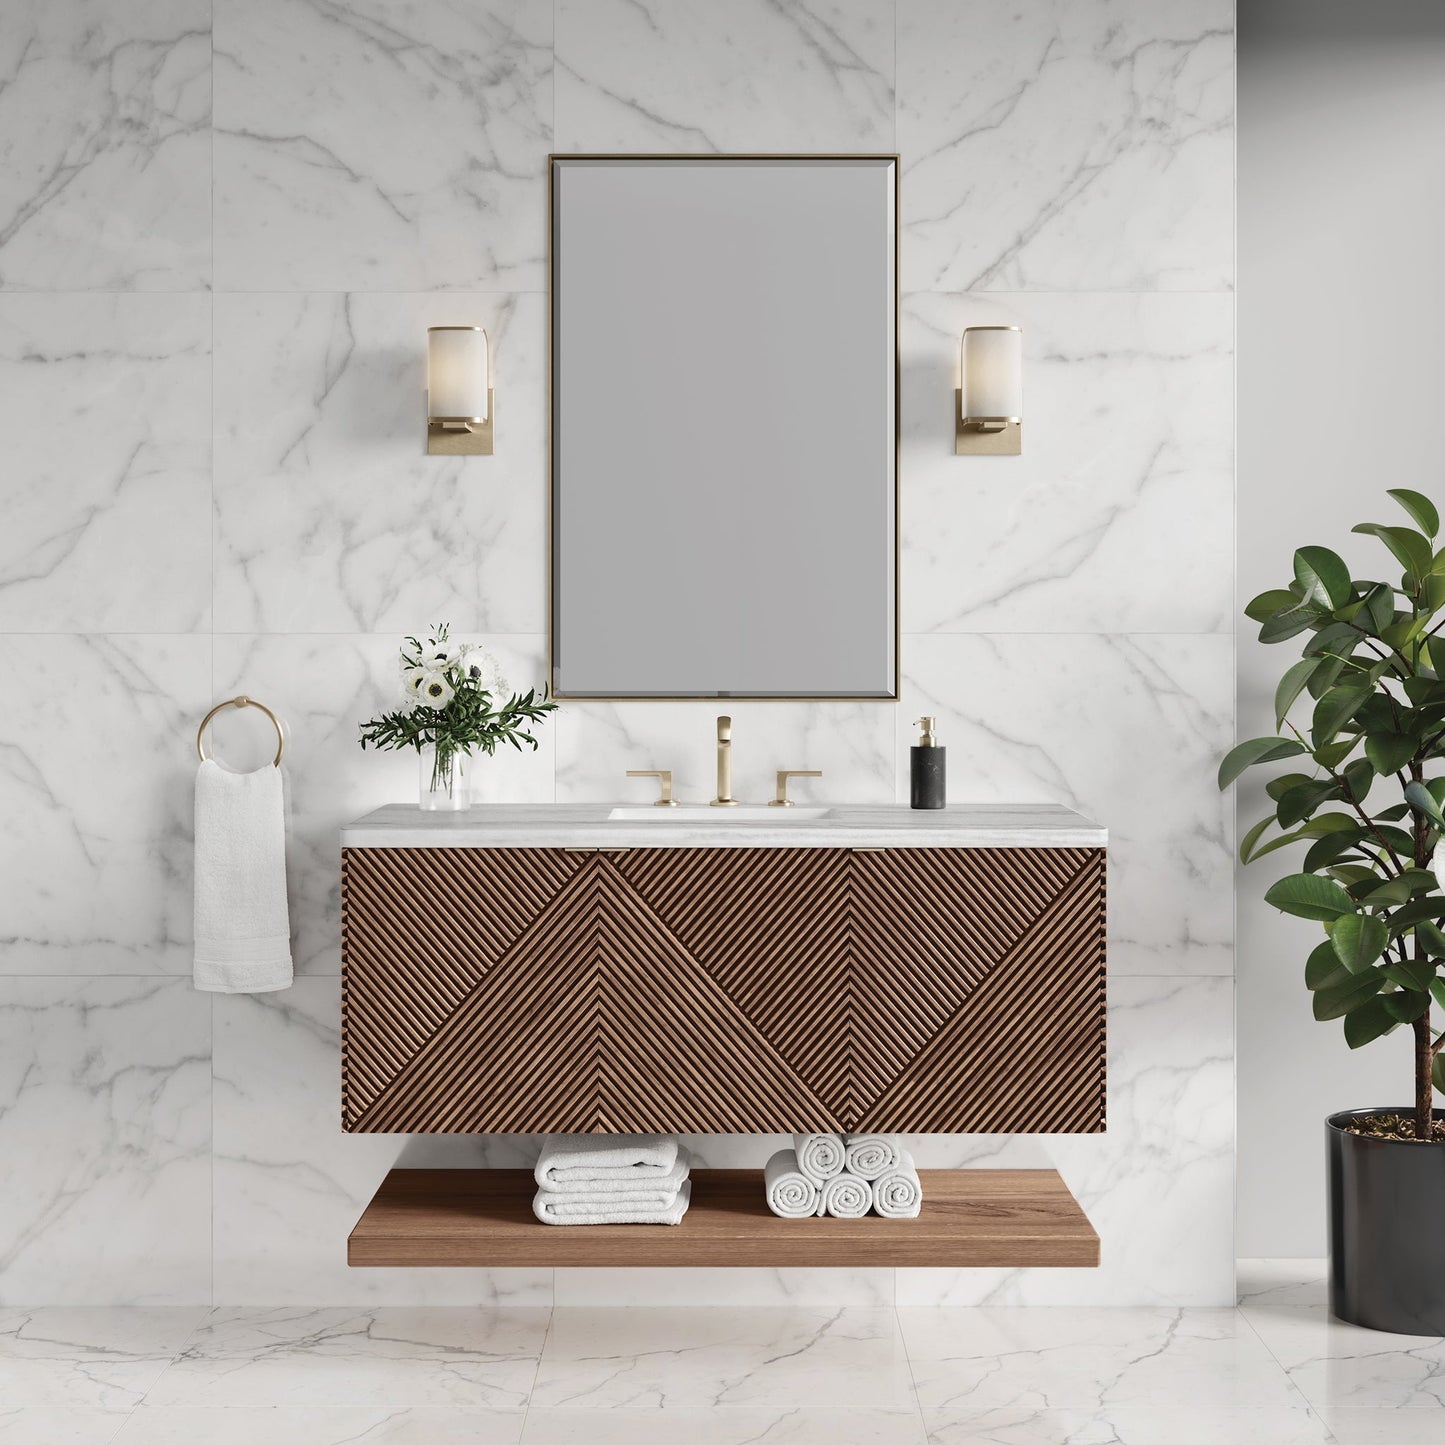 Newest Products – James Martin Vanities